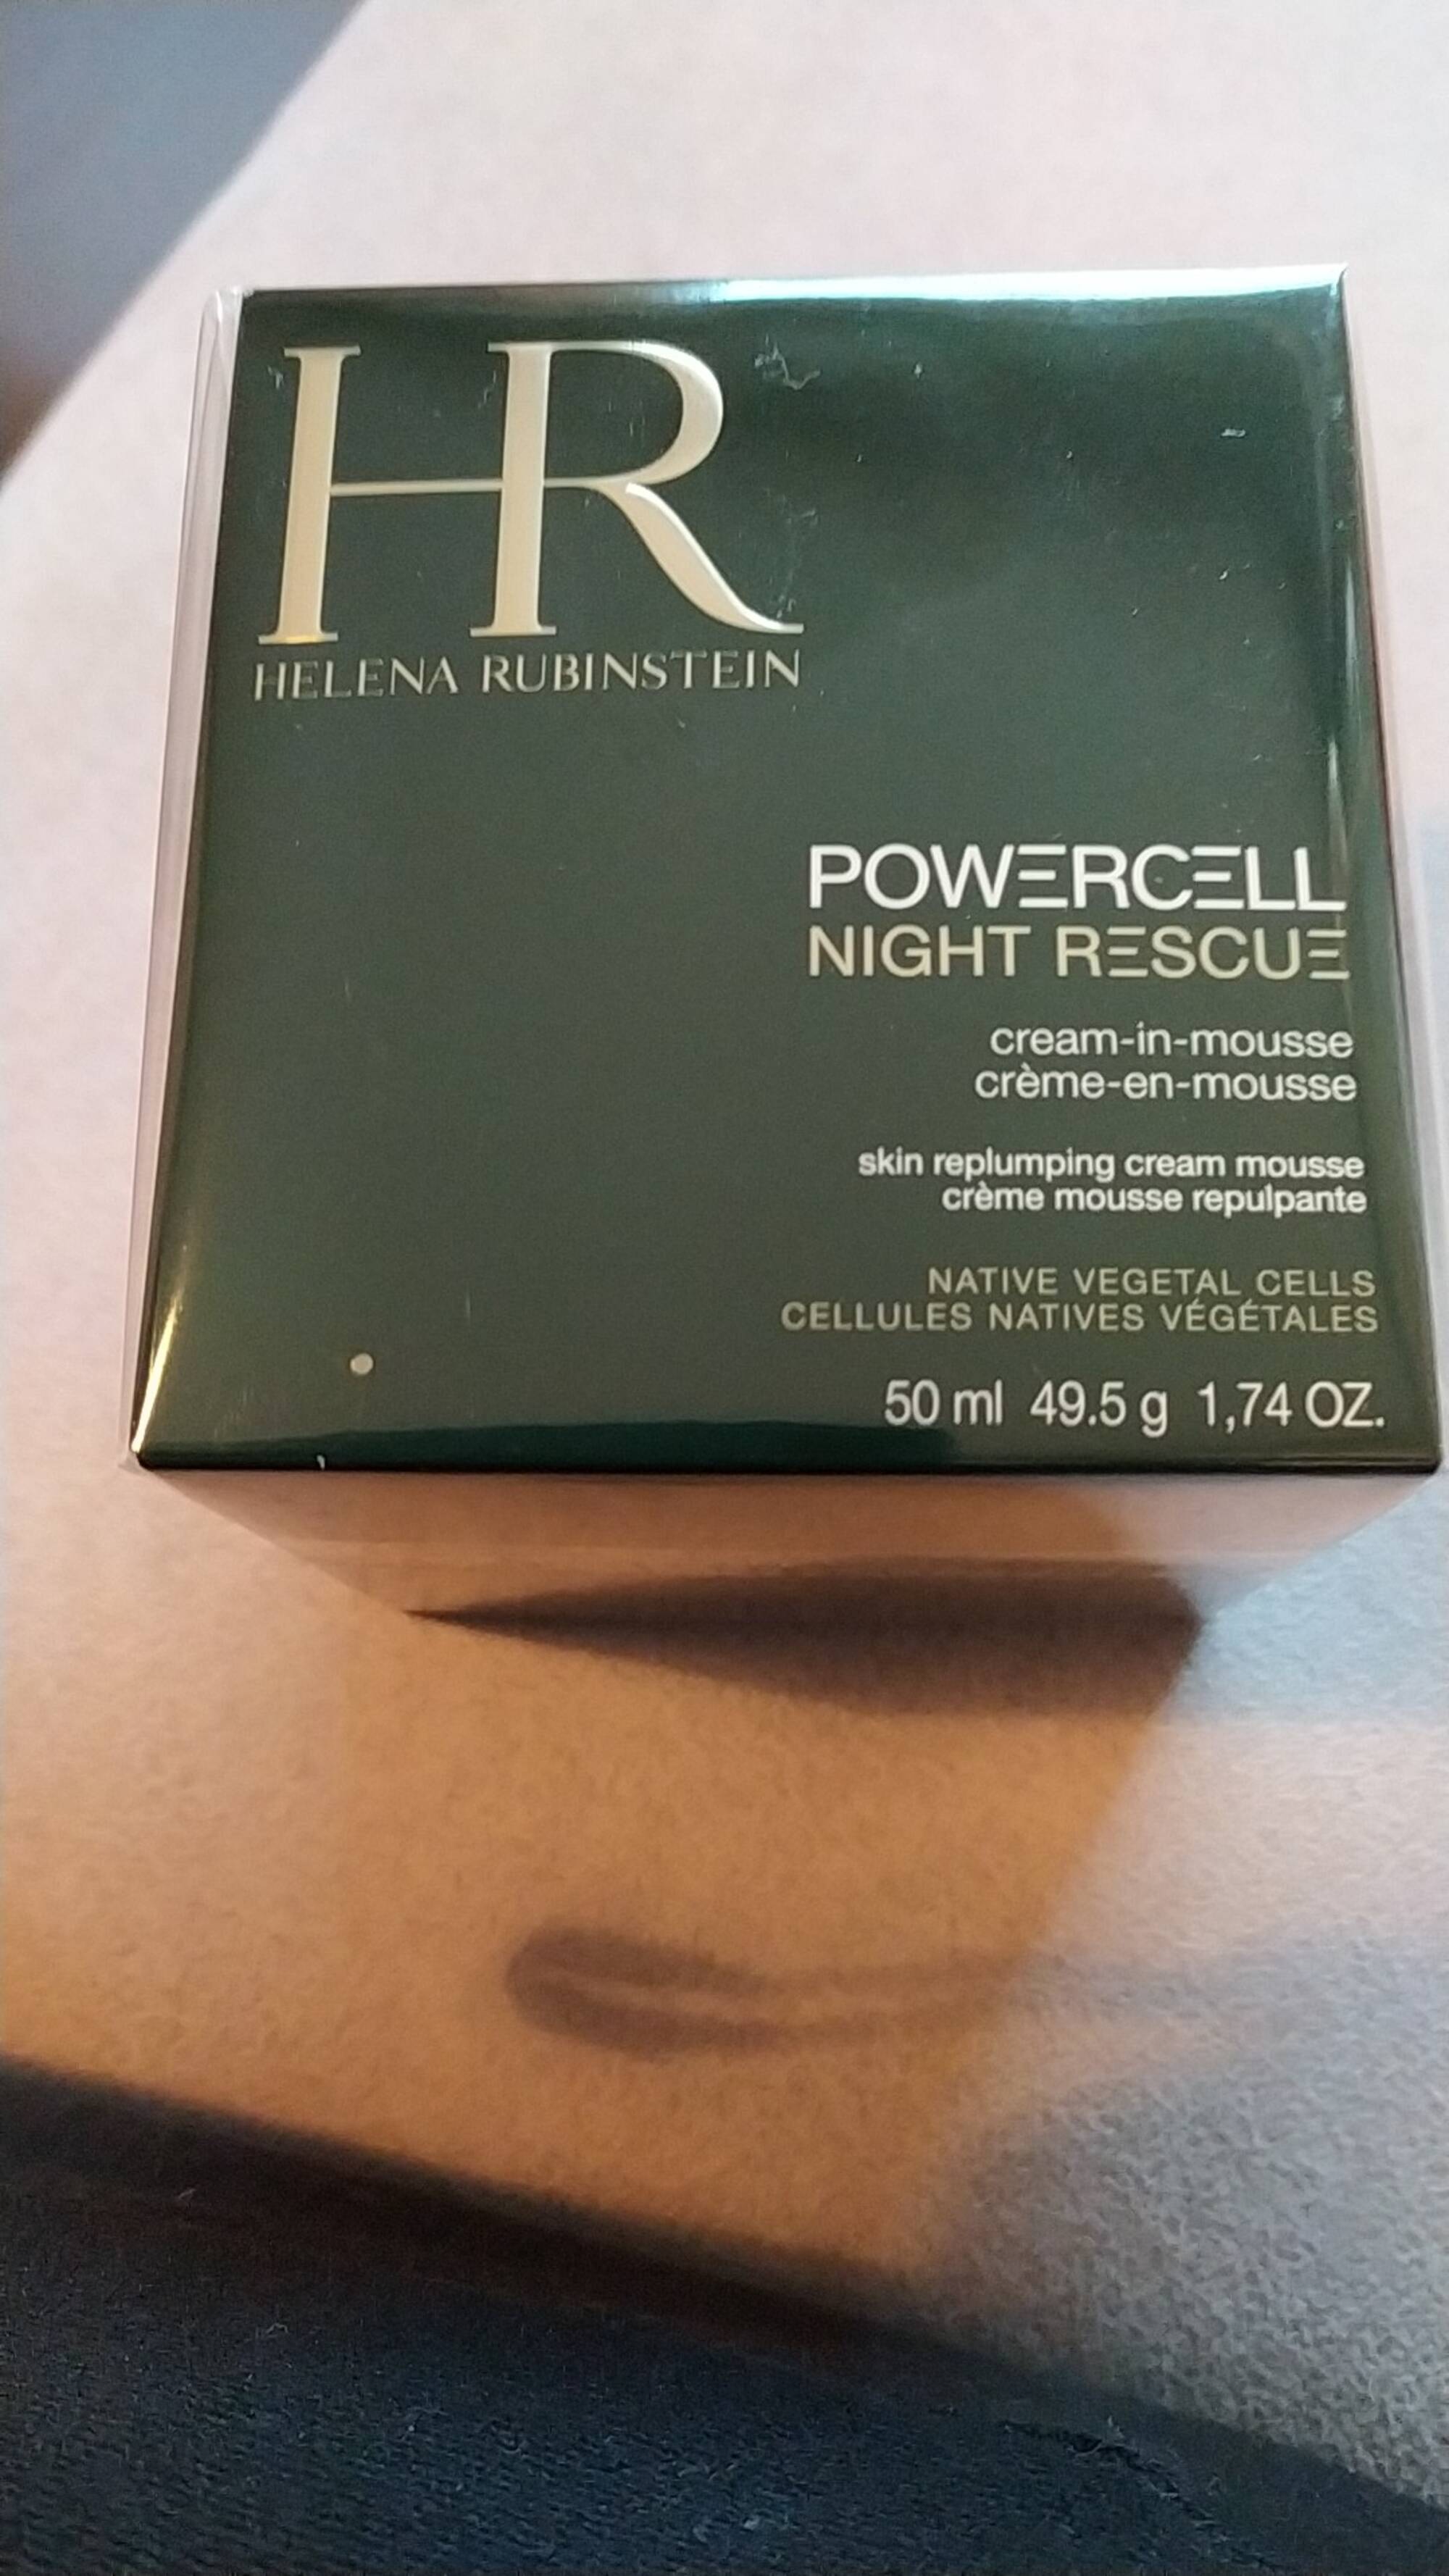 HELENA RUBINSTEIN - Powercell night rescue - Crème en mousse